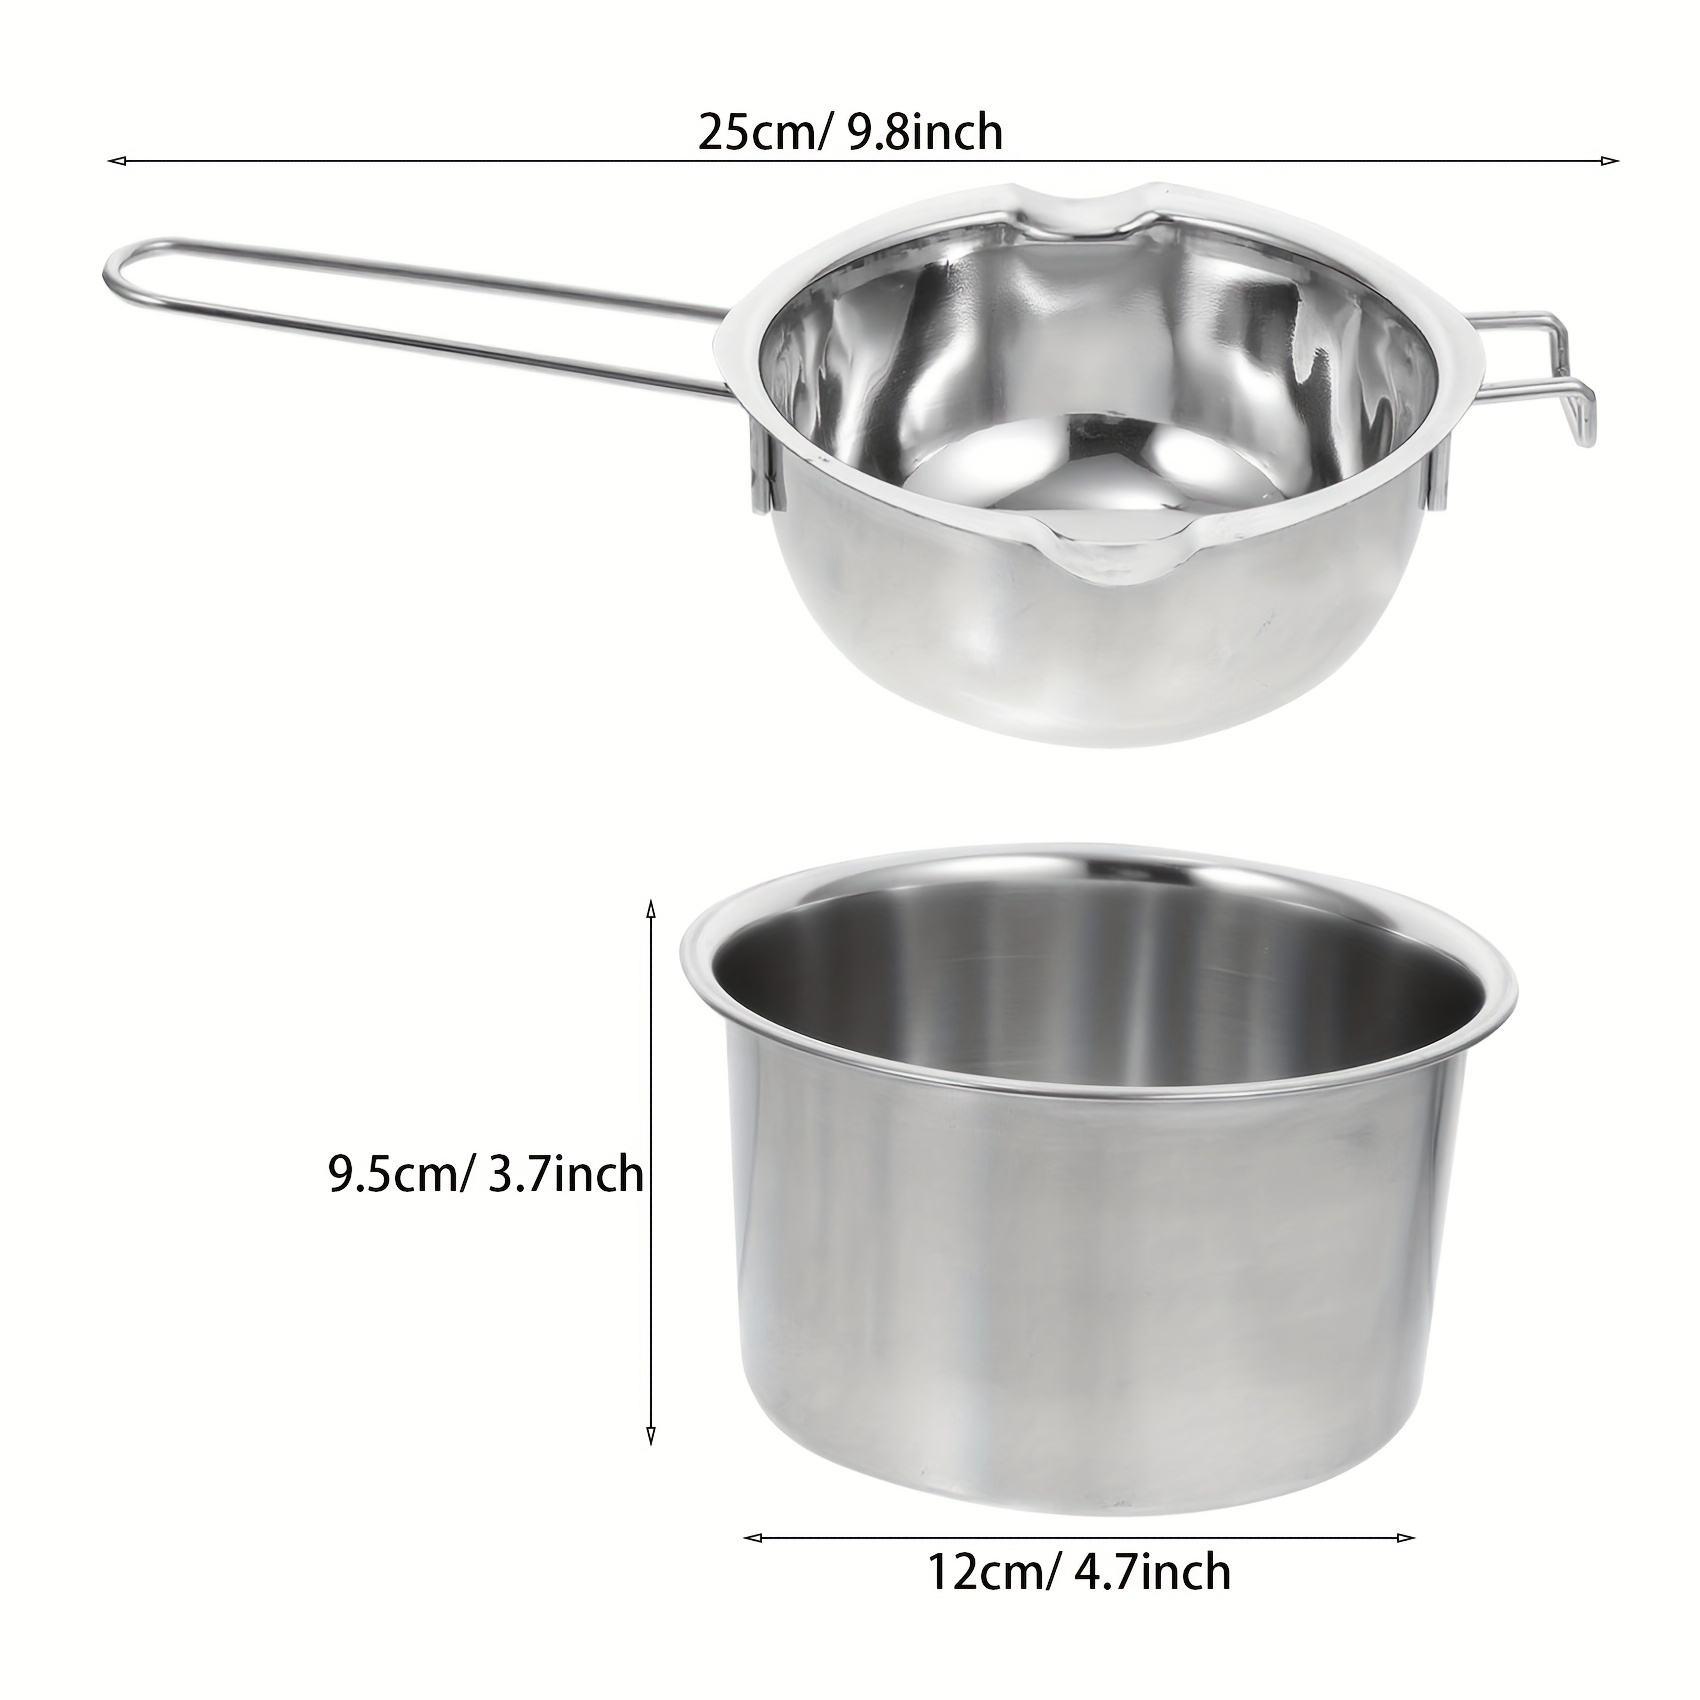 Soap Wax Double Boiler - Mini Double Boiler For Soap Wax / Oils /  Chocolates Manufacturer from Hyderabad